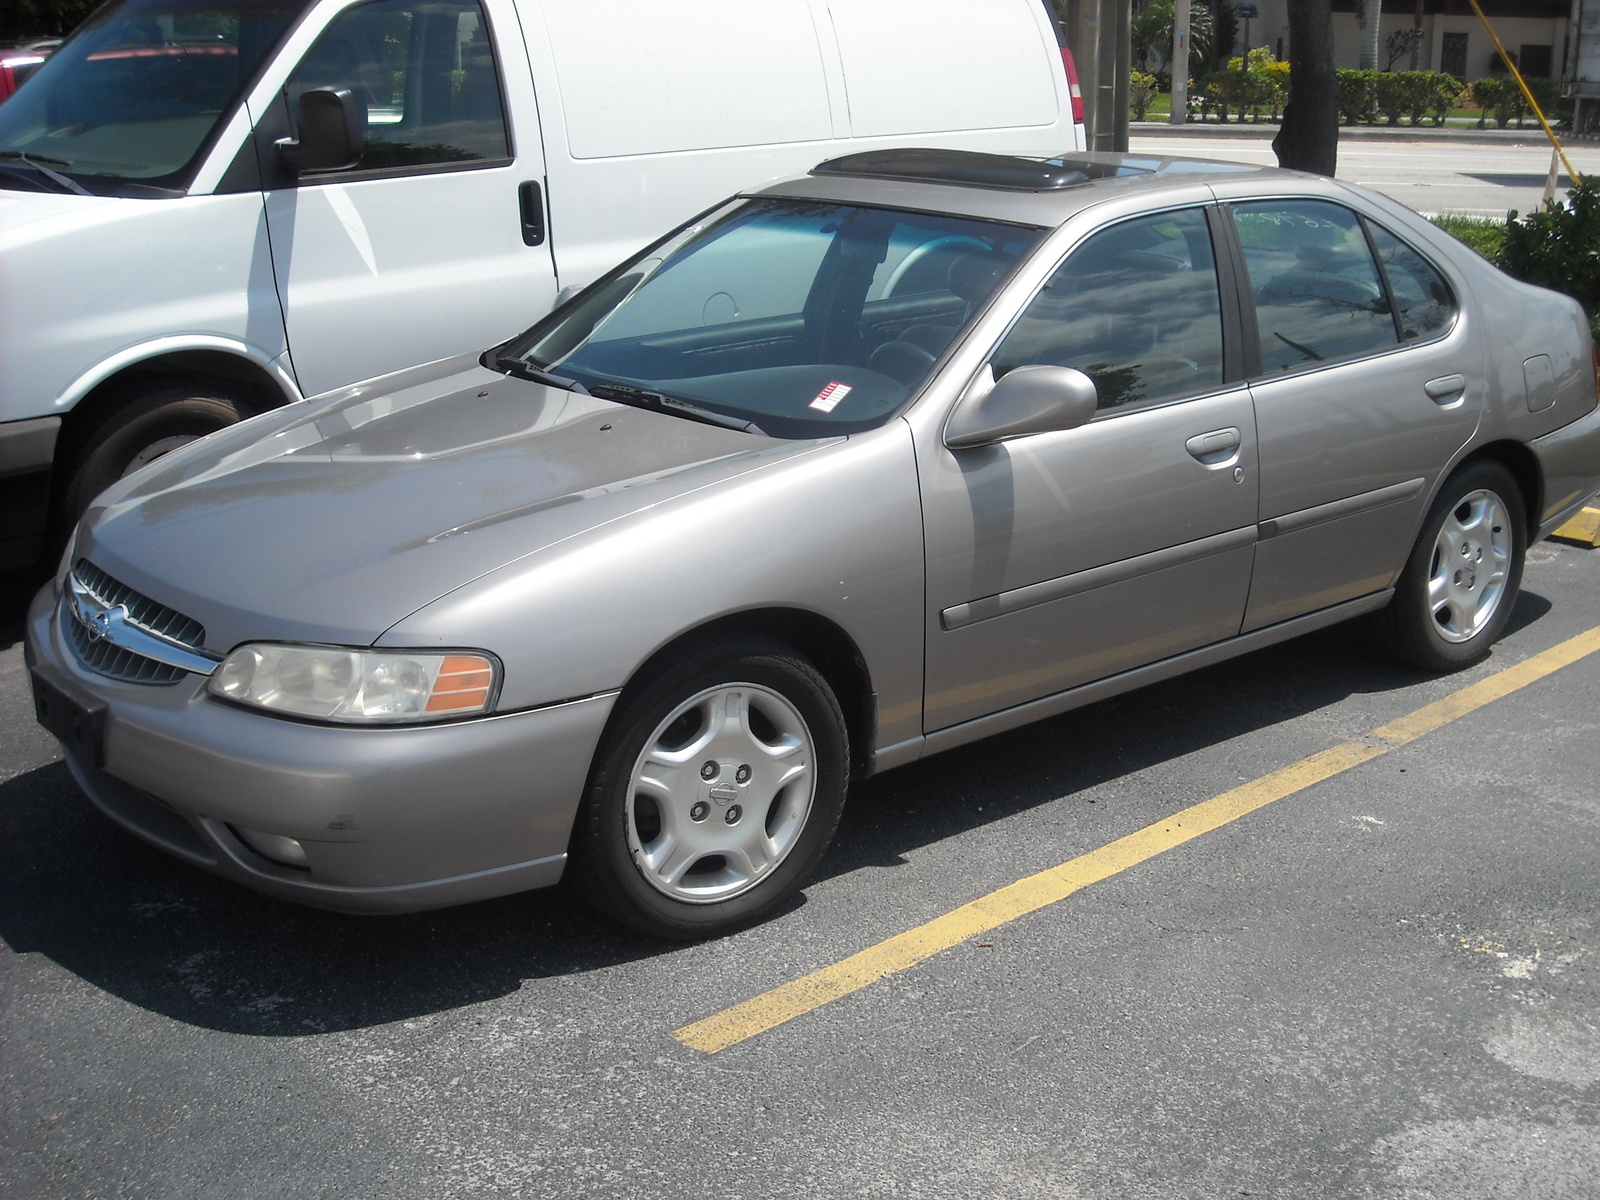 1998 Nissan altima gxe owners manual